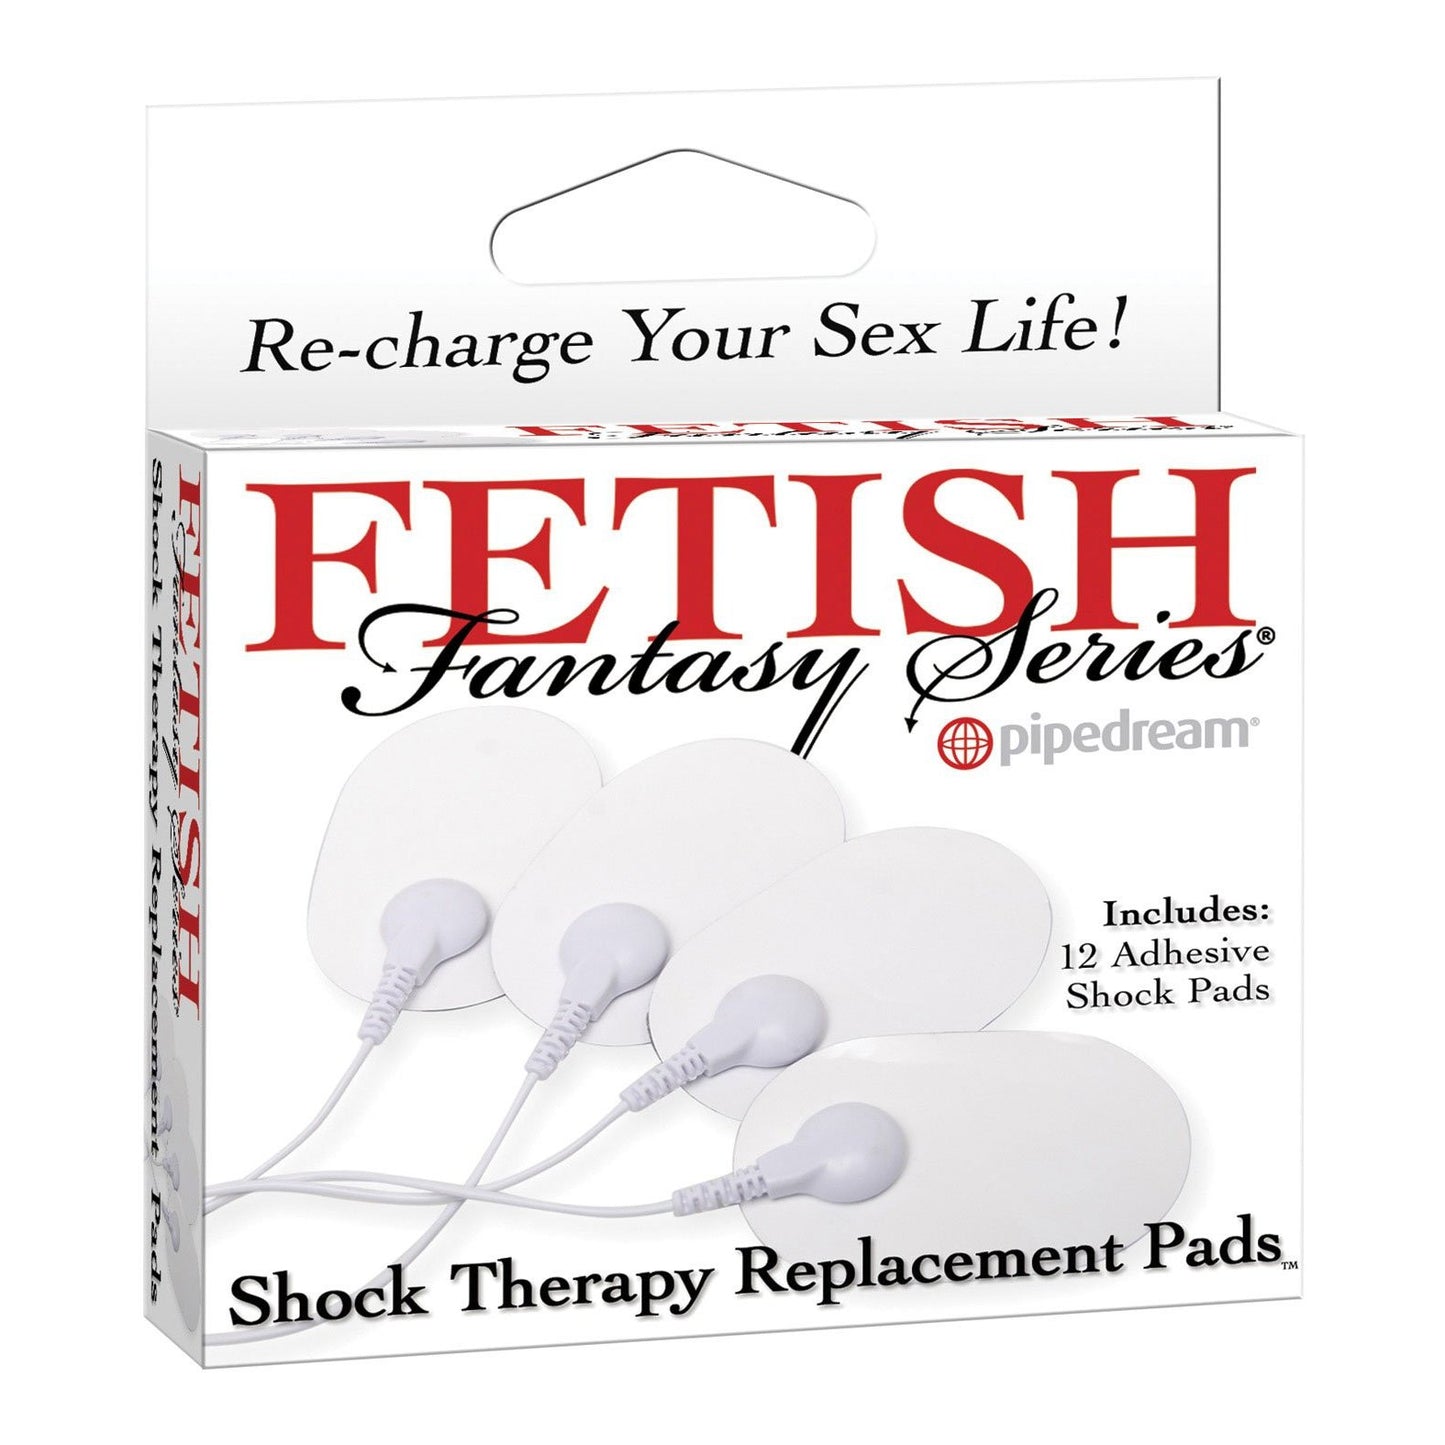 Fetish Fantasy Therapy Replacement Pads - 12 Piece